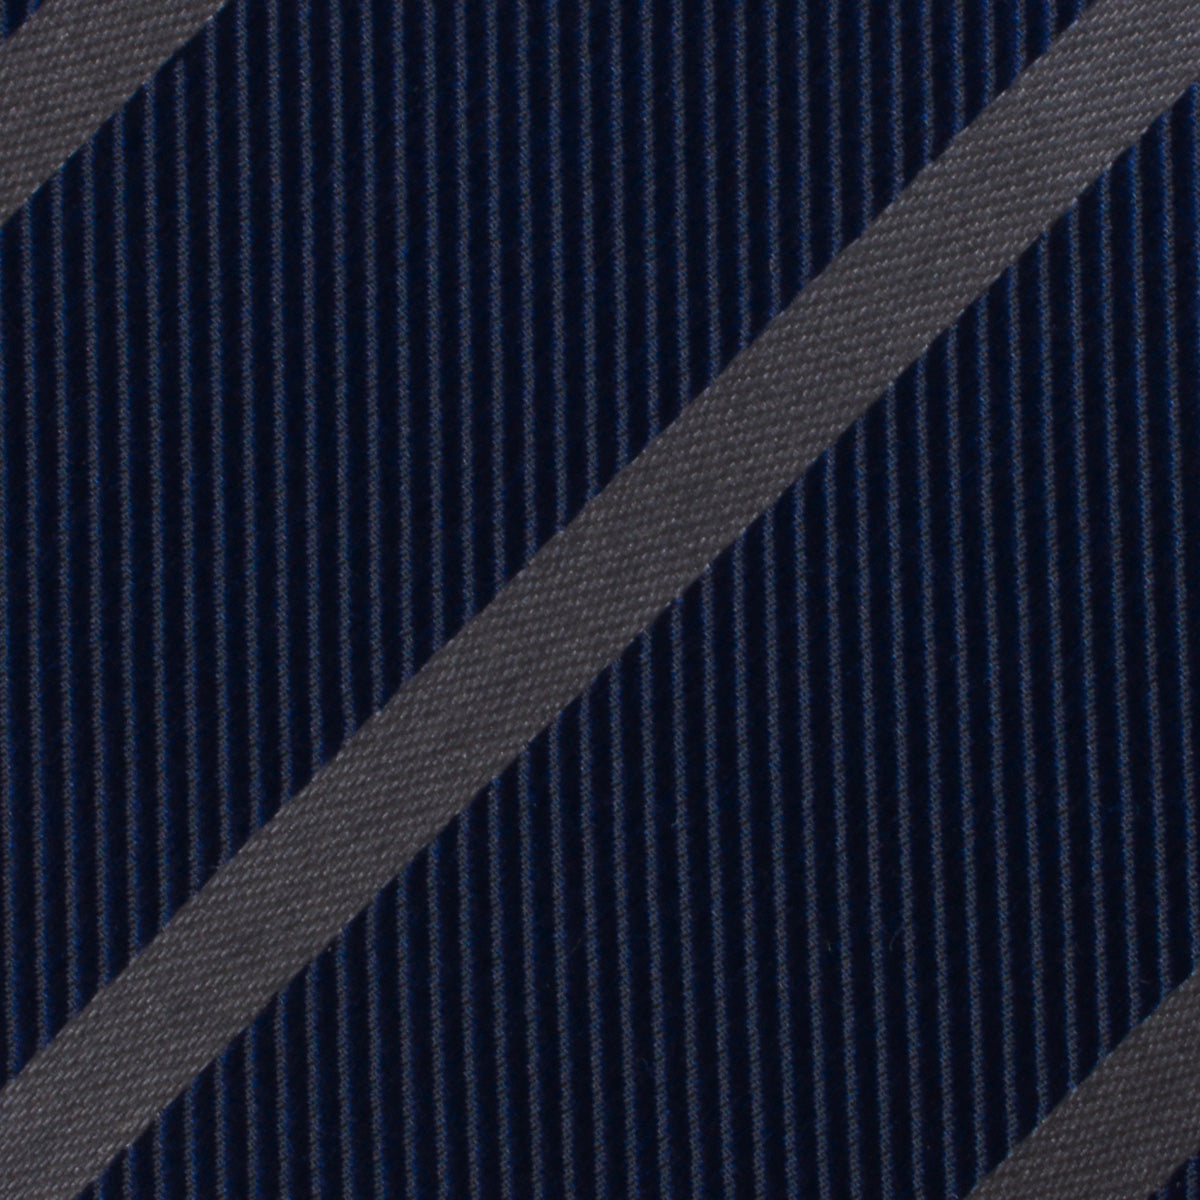 Charcoal Grey Striped Pocket Square Fabric